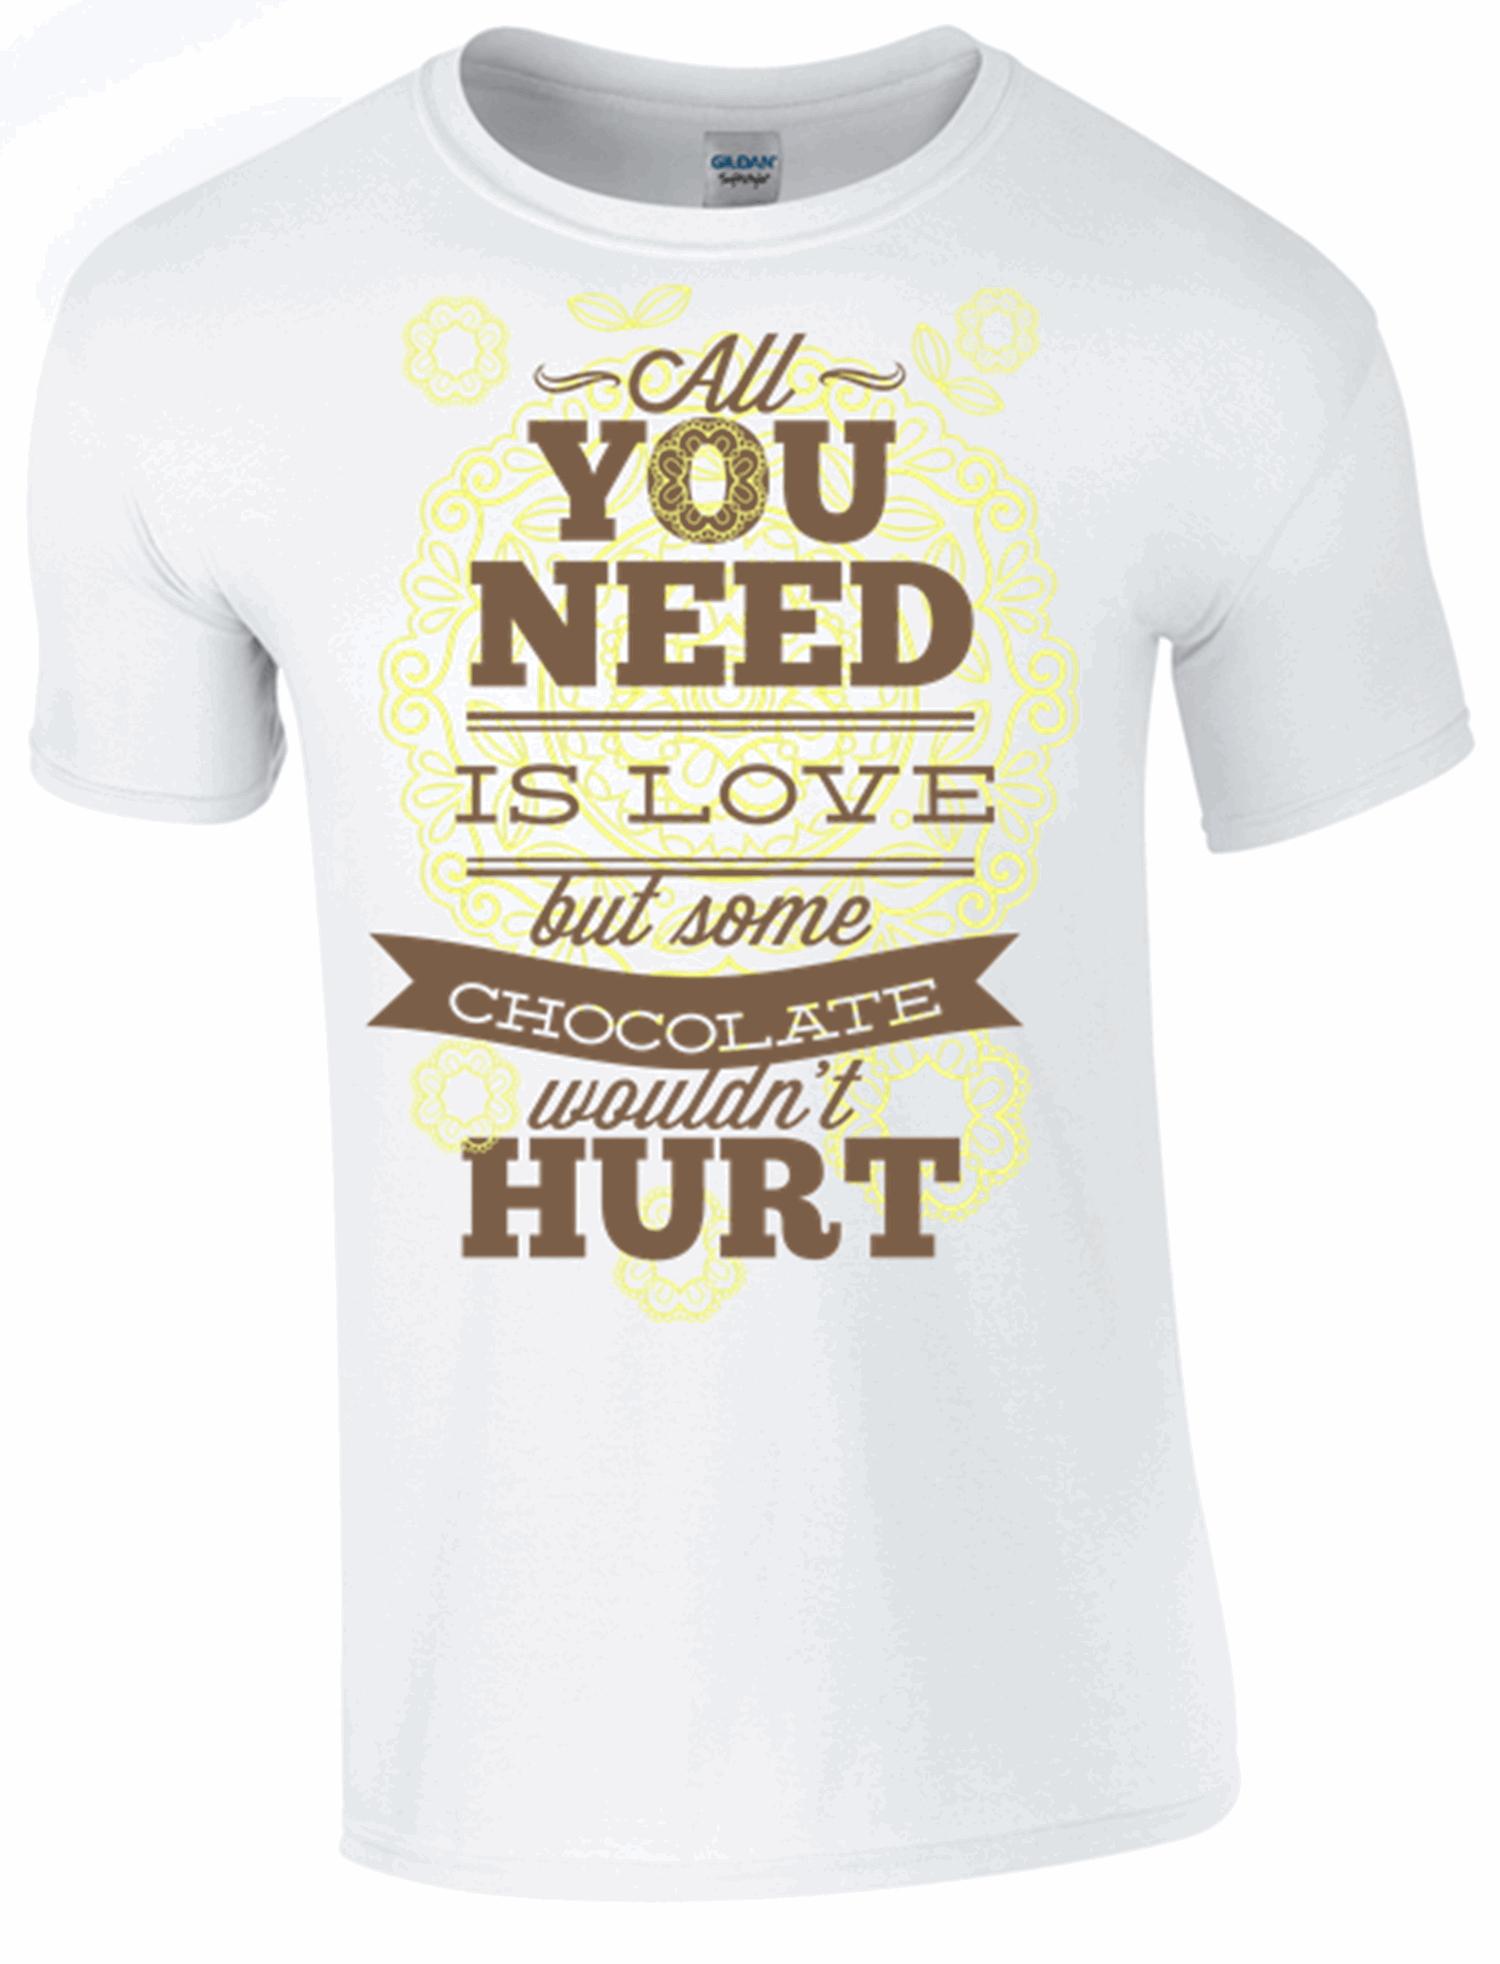 All you Need is Love T-Shirt - Army 1157 kit S Army 1157 Kit Veterans Owned Business